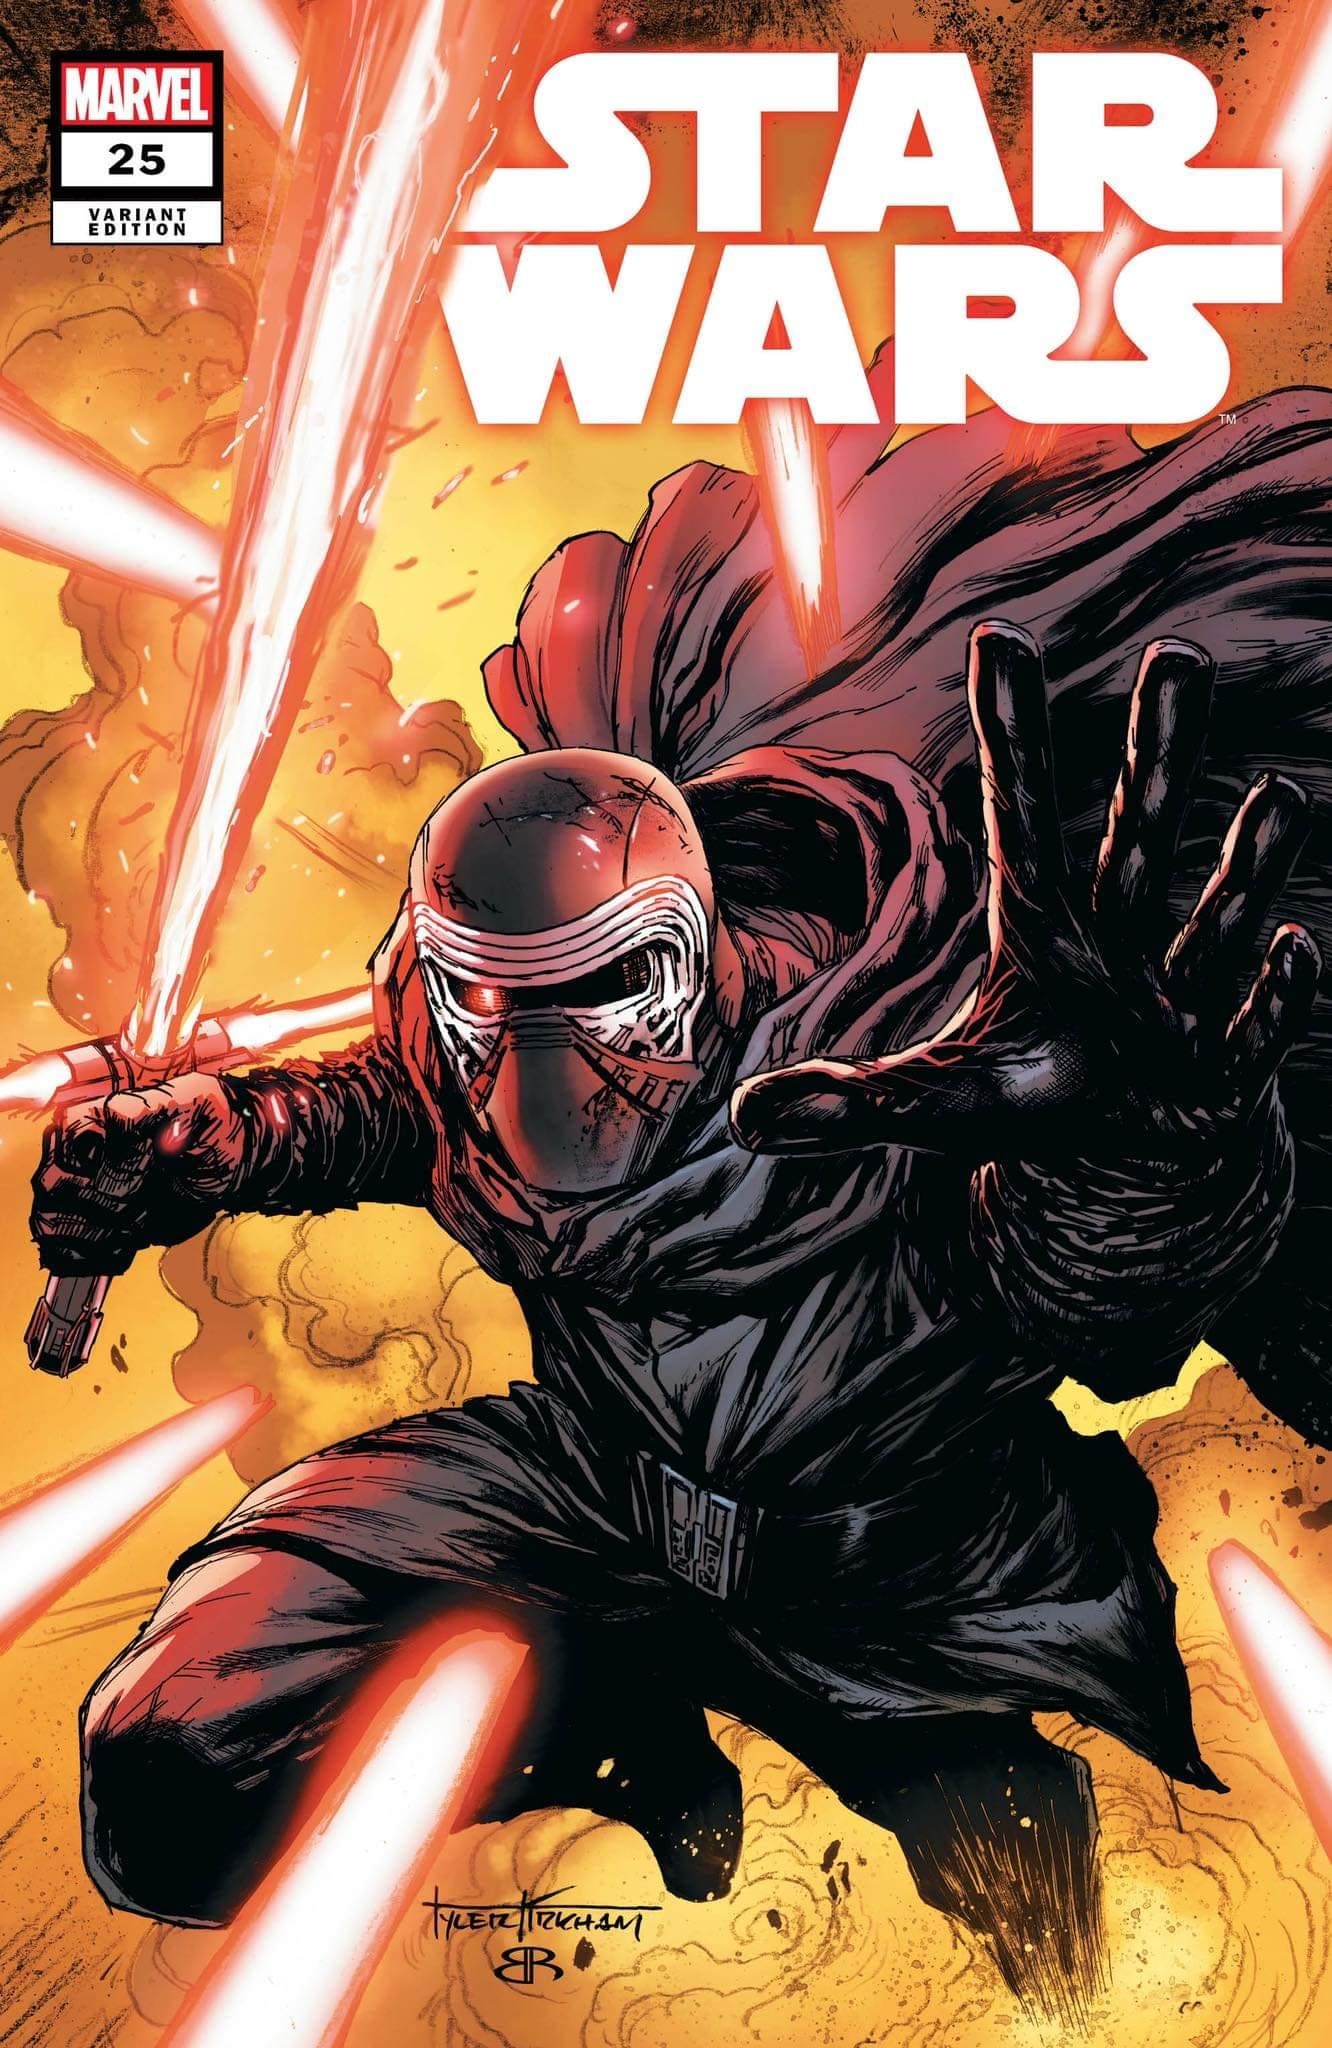 STAR WARS #25 - TYLER KIRKHAM EXCLUSIVE COVER - The Comic Construct